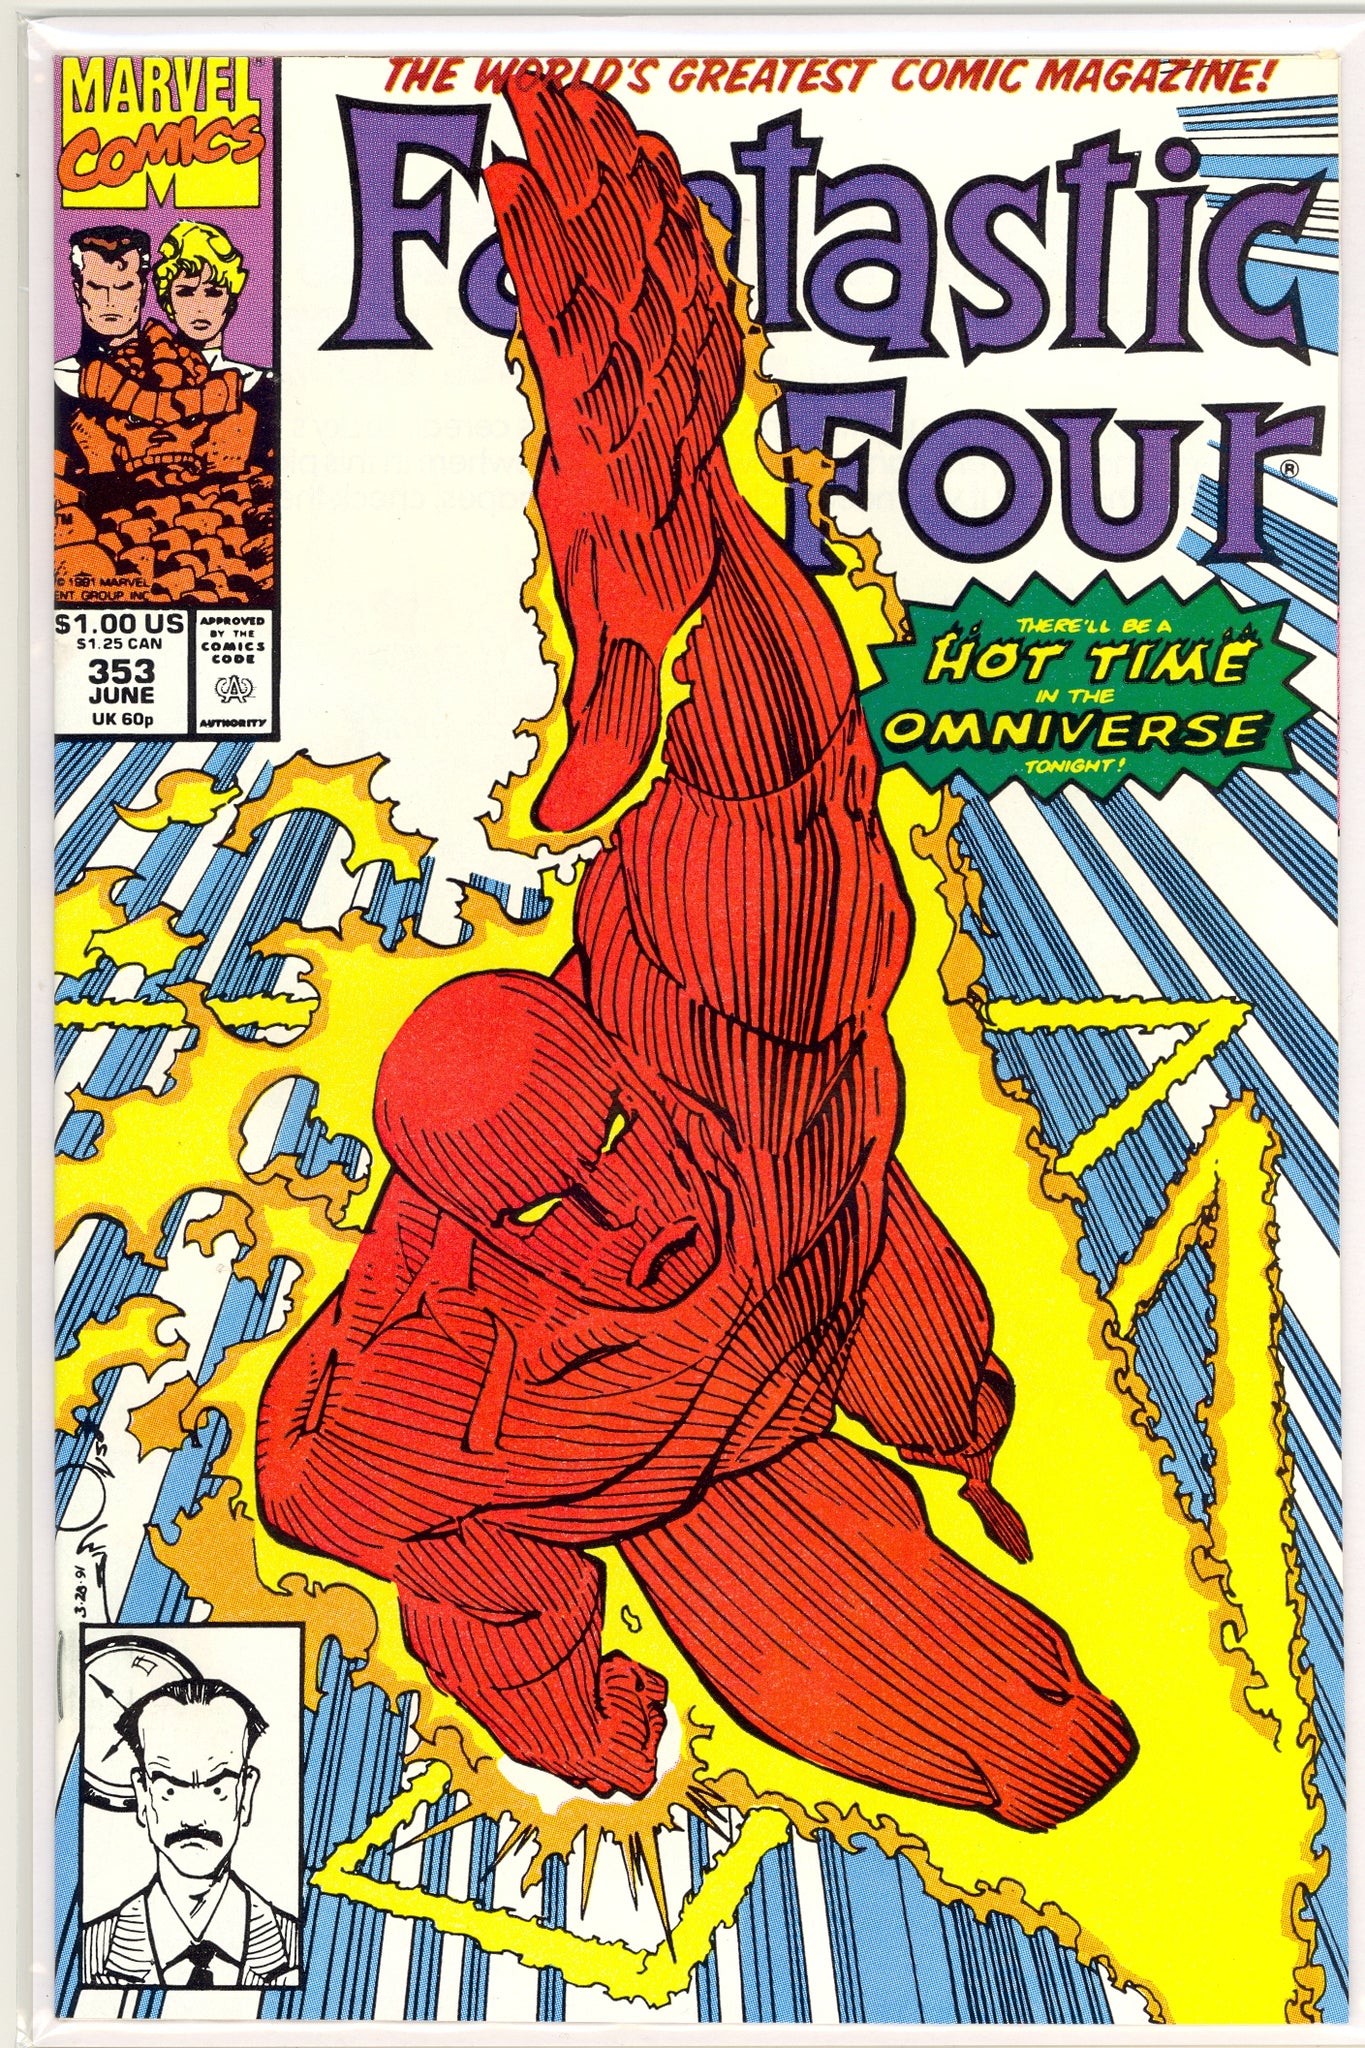 Fantastic Four #353 (1991) Mobius, Time Variance Authority